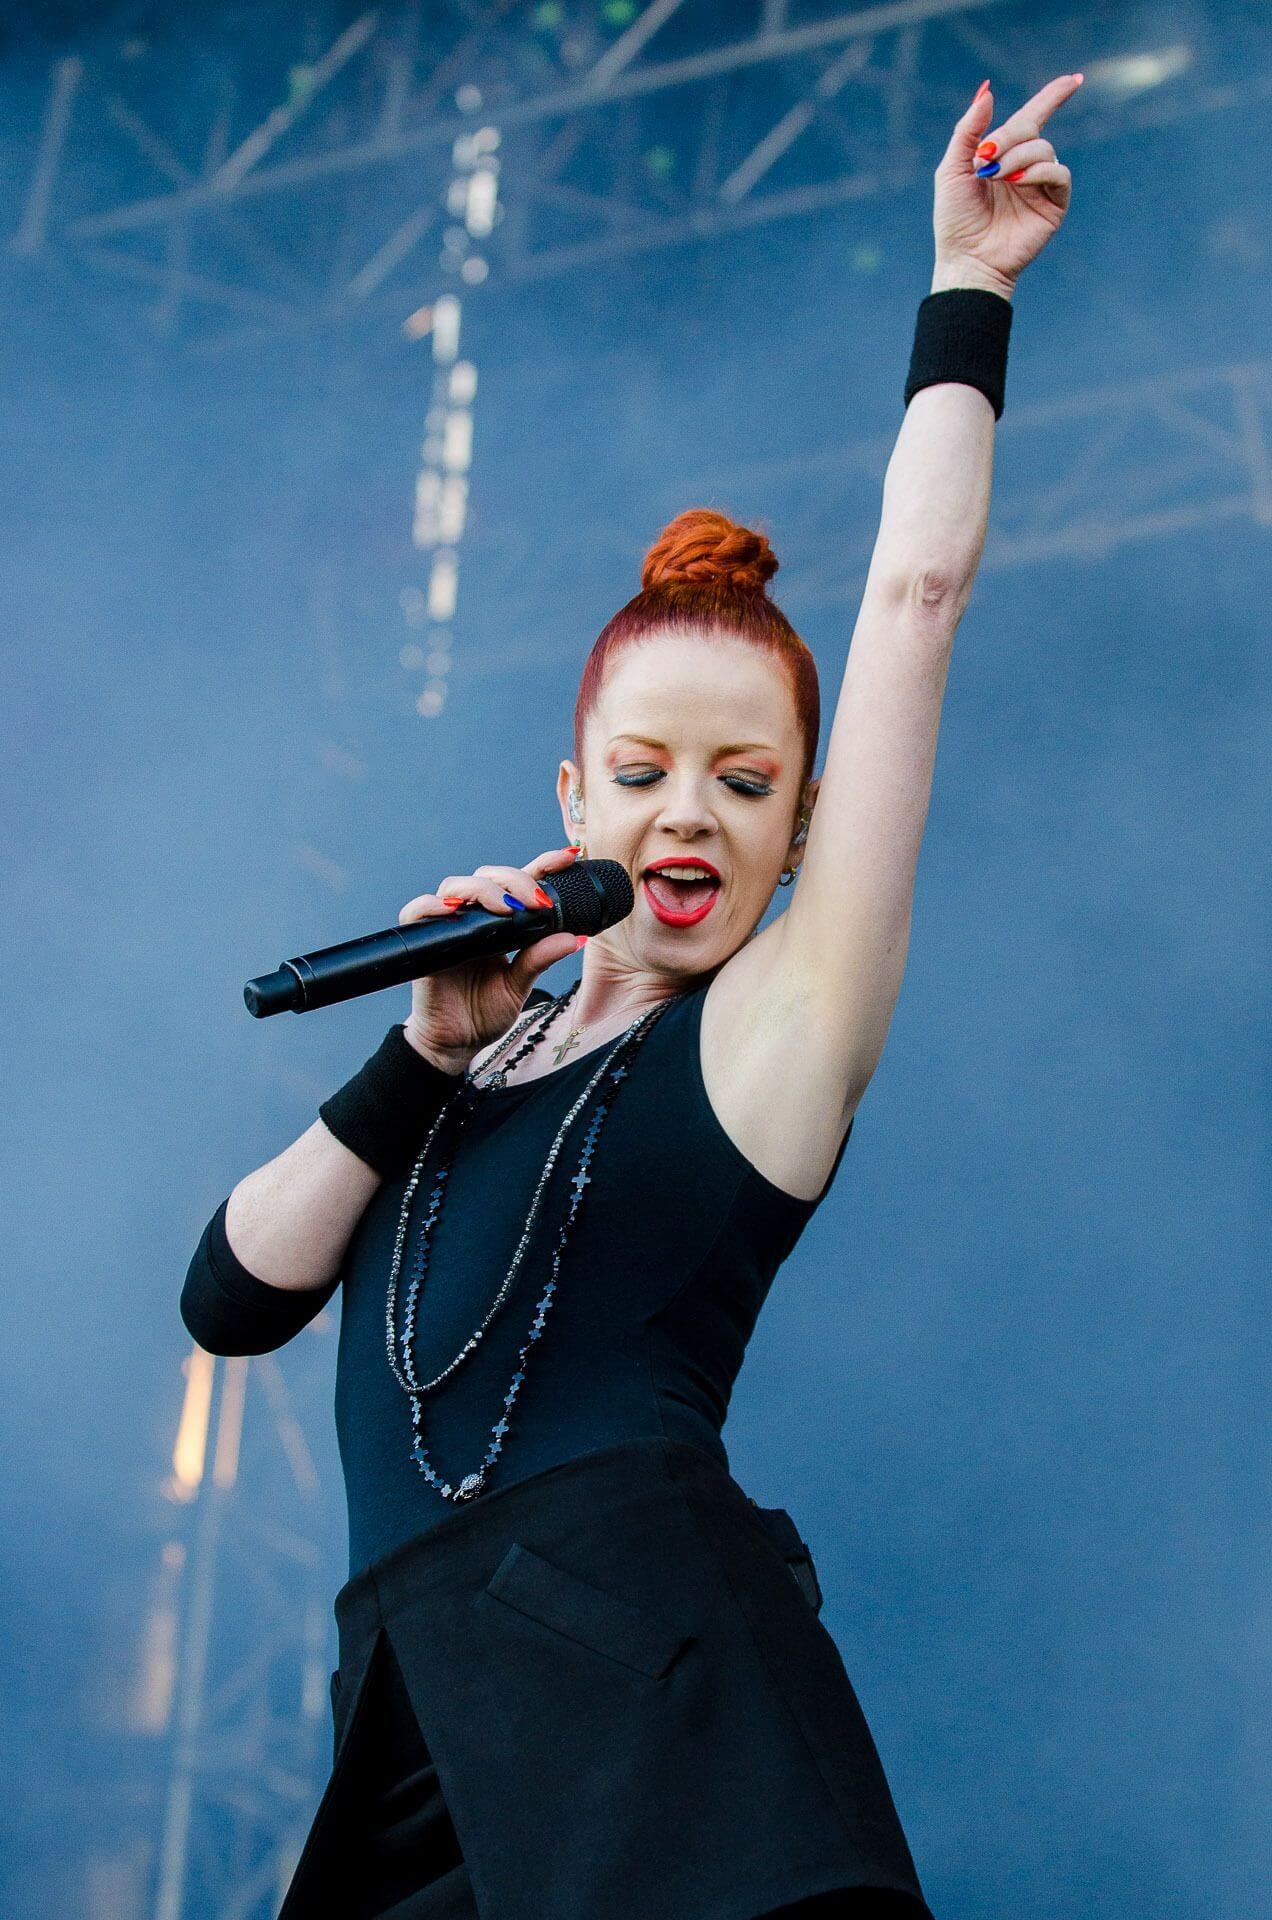 Garbage band, Shirley Manson, Hot pictures, Viraler, 1280x1920 HD Handy